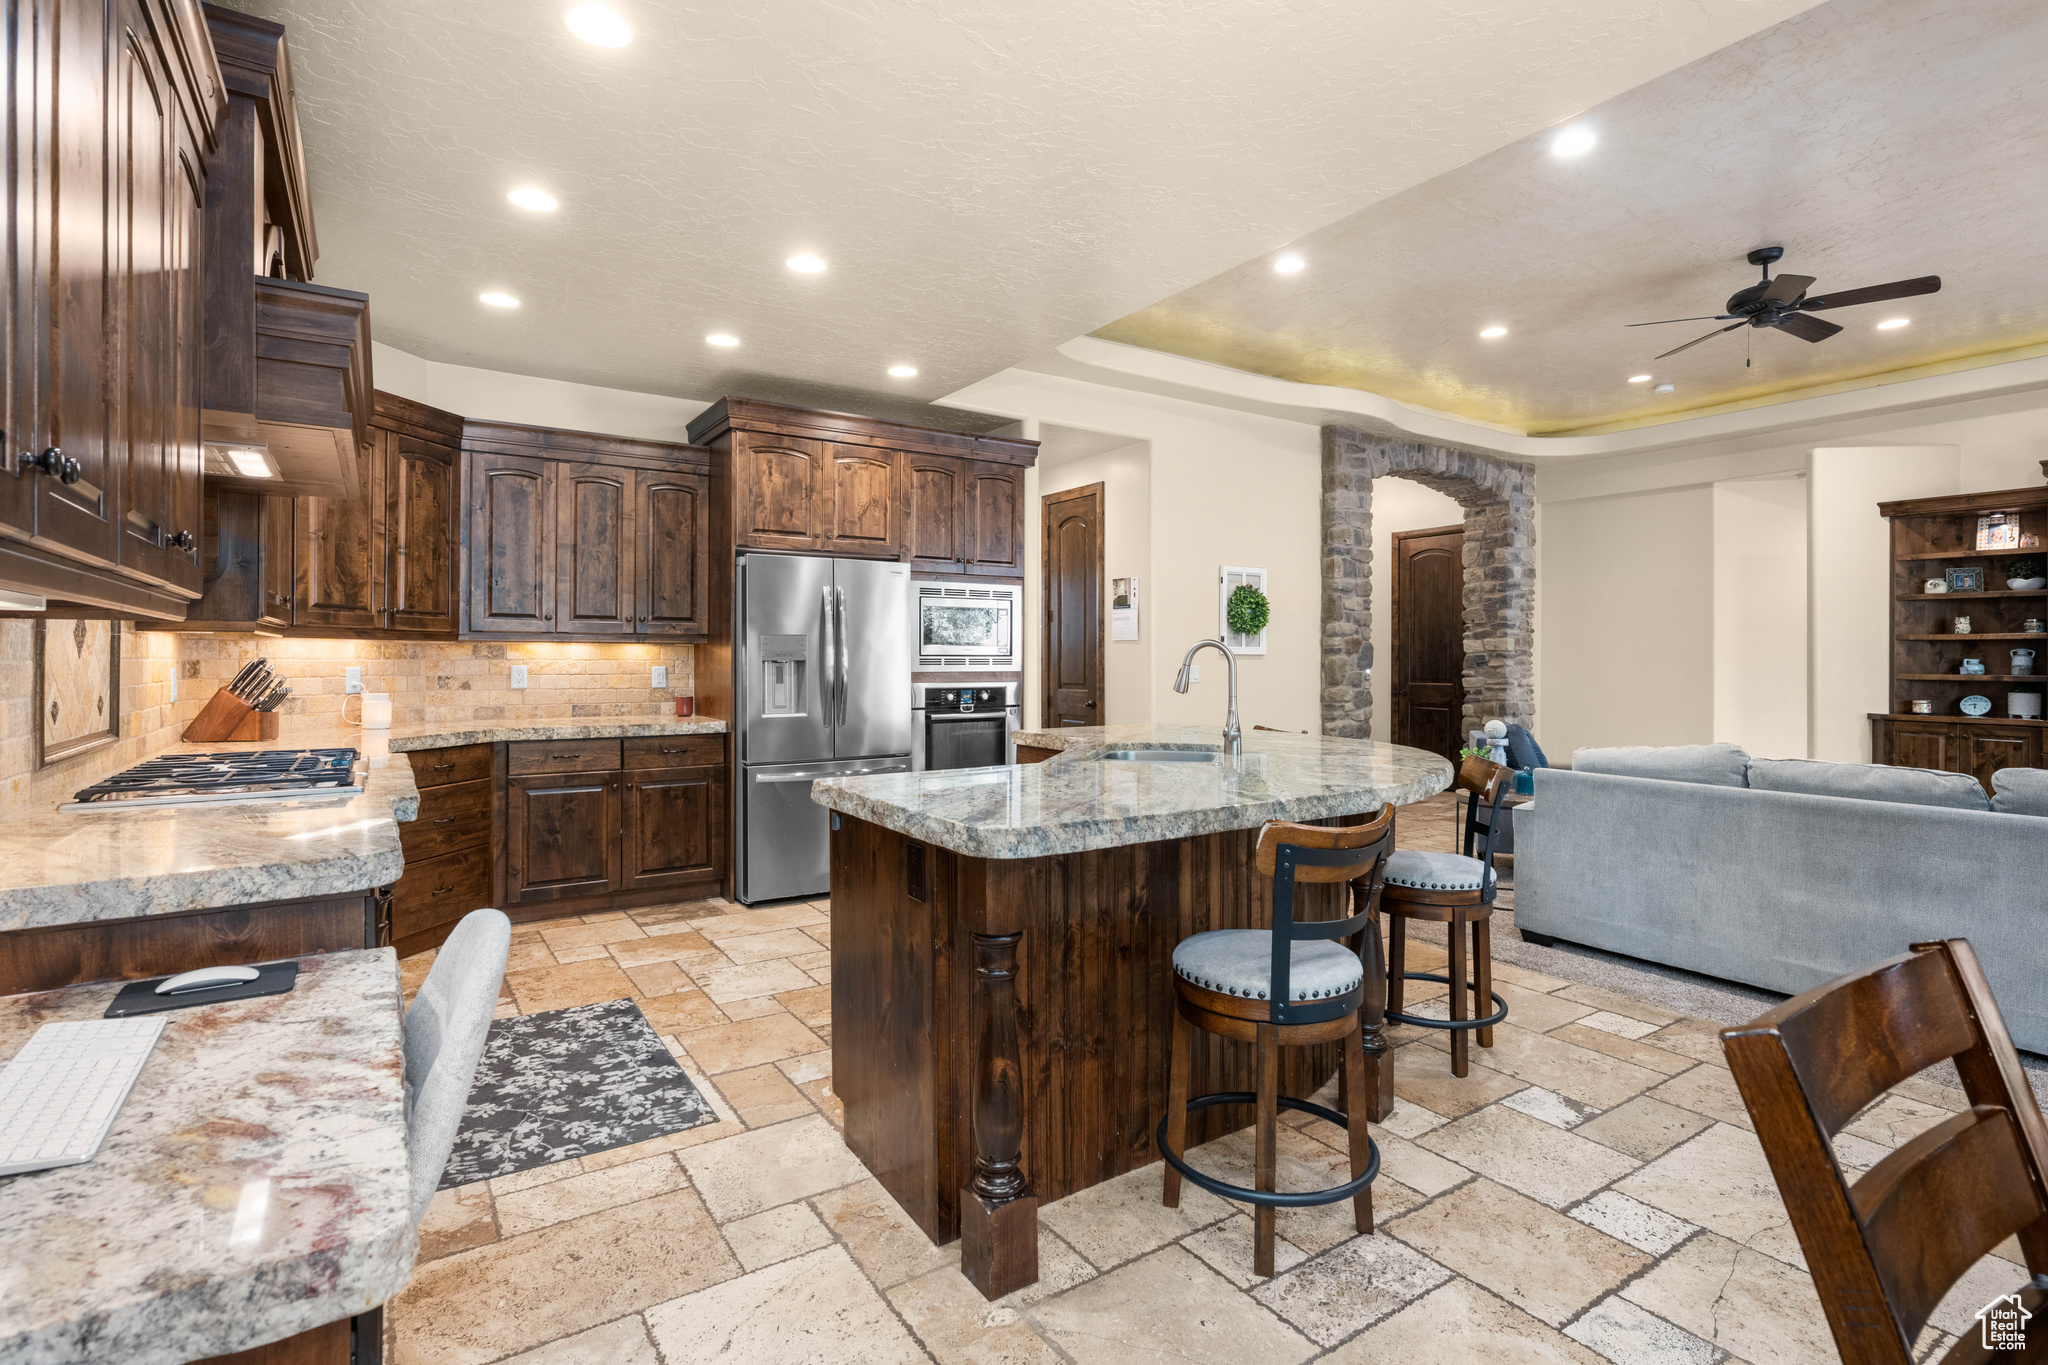 Kitchen with appliances with stainless steel finishes, ceiling fan, backsplash, a raised ceiling, and a center island with sink